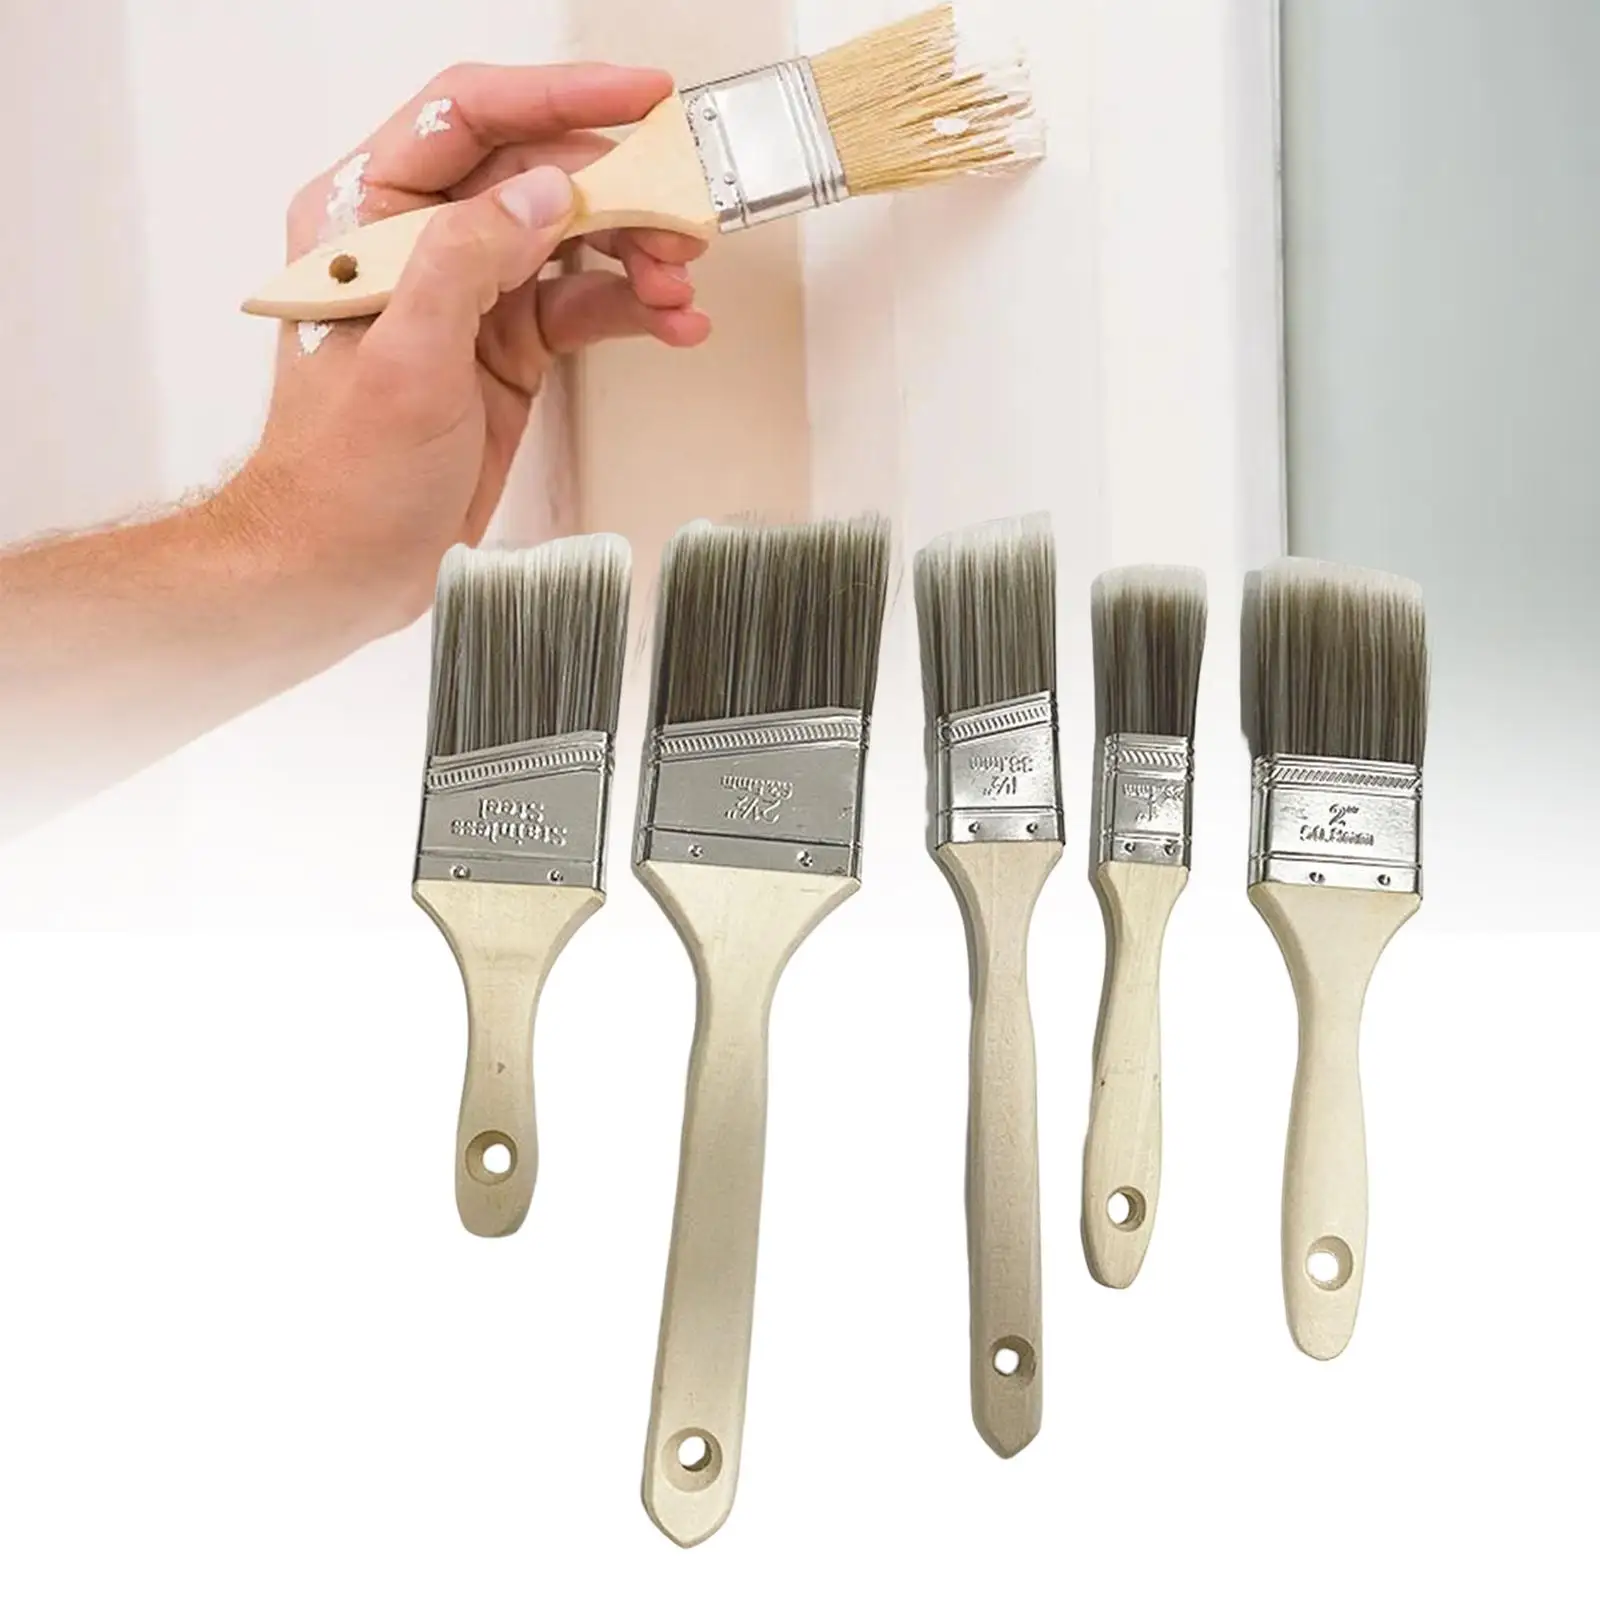 5x Paint Brushes Variety Angle Art Paint Brushes Wooden Handle Brushes corners Cabinets Outdoor Decks Crafts Bathrooms